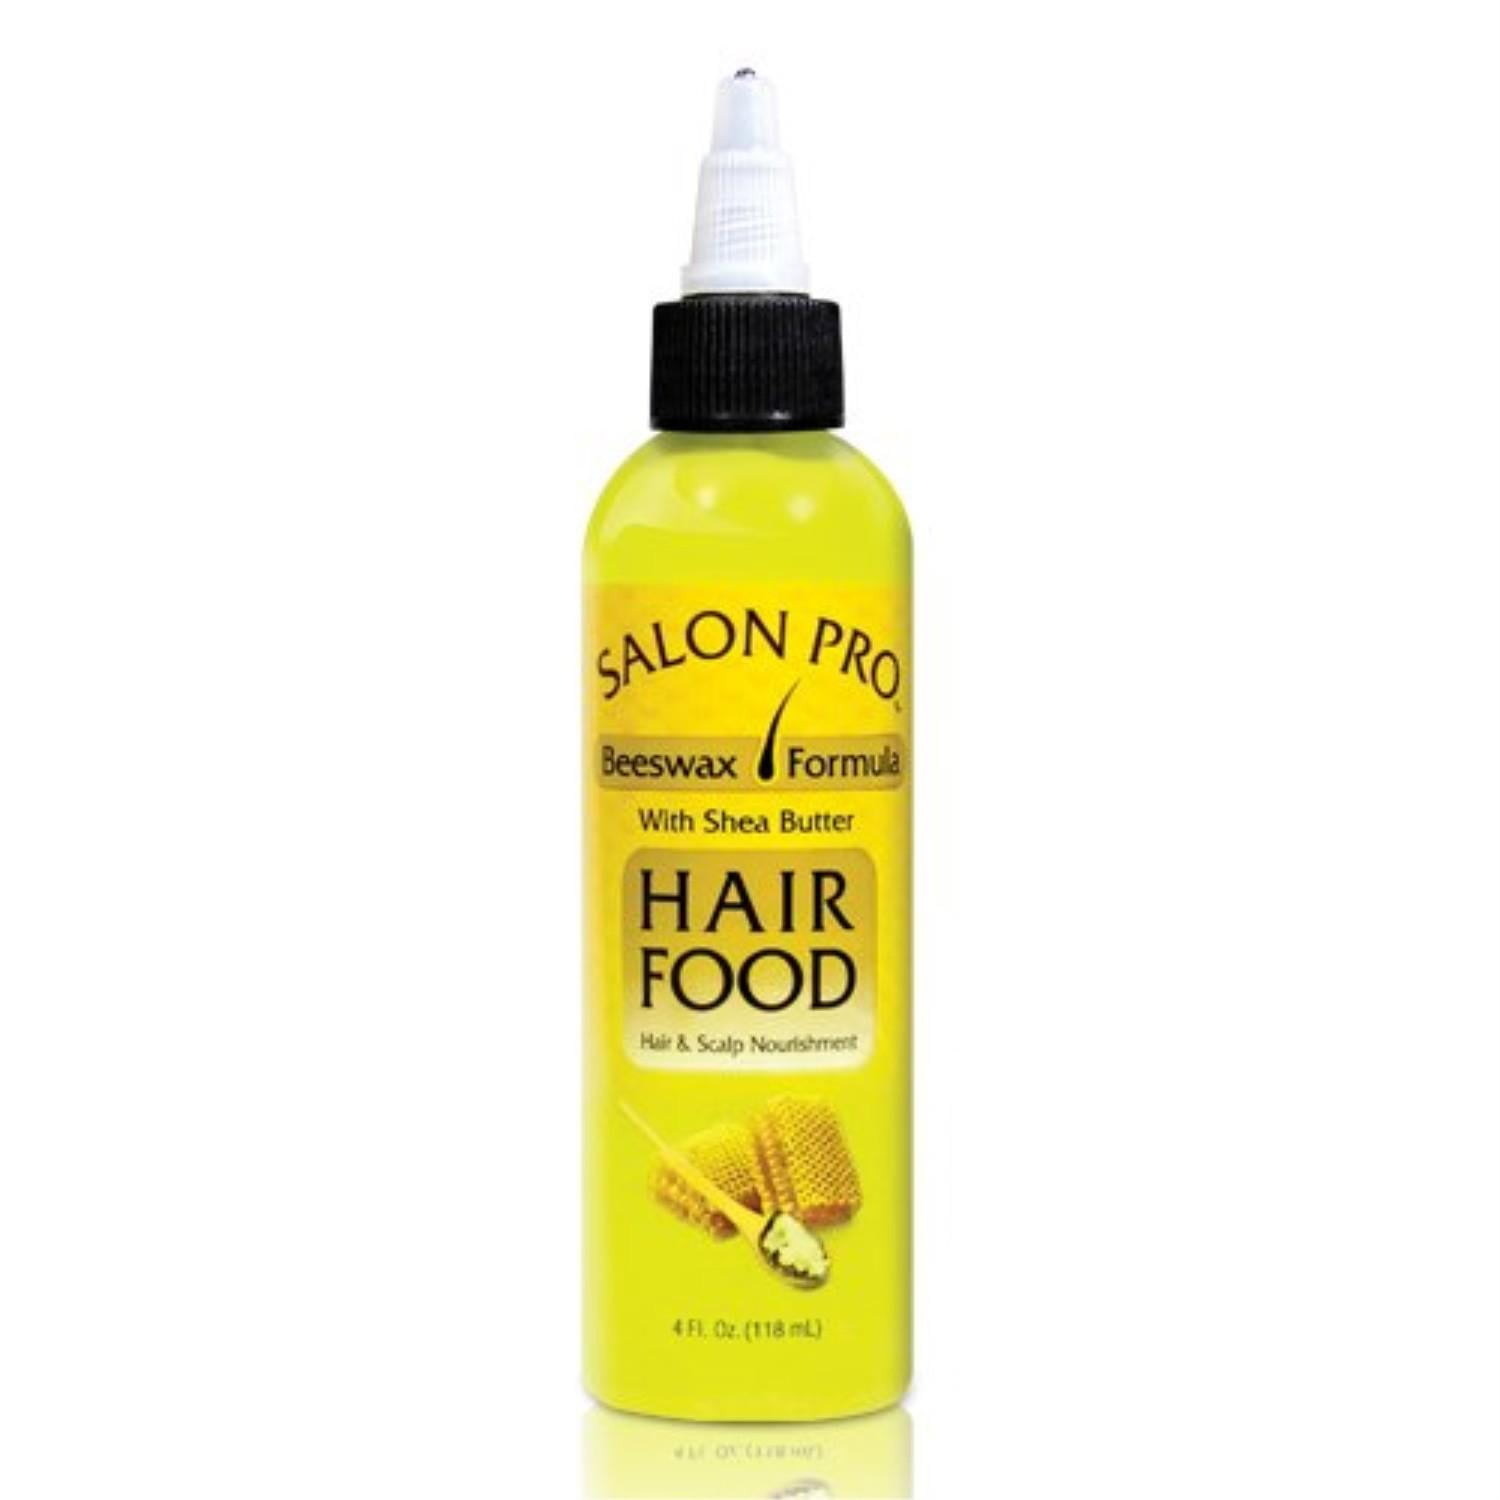  Proclaim Natural Beeswax Hairdress : Beauty & Personal Care